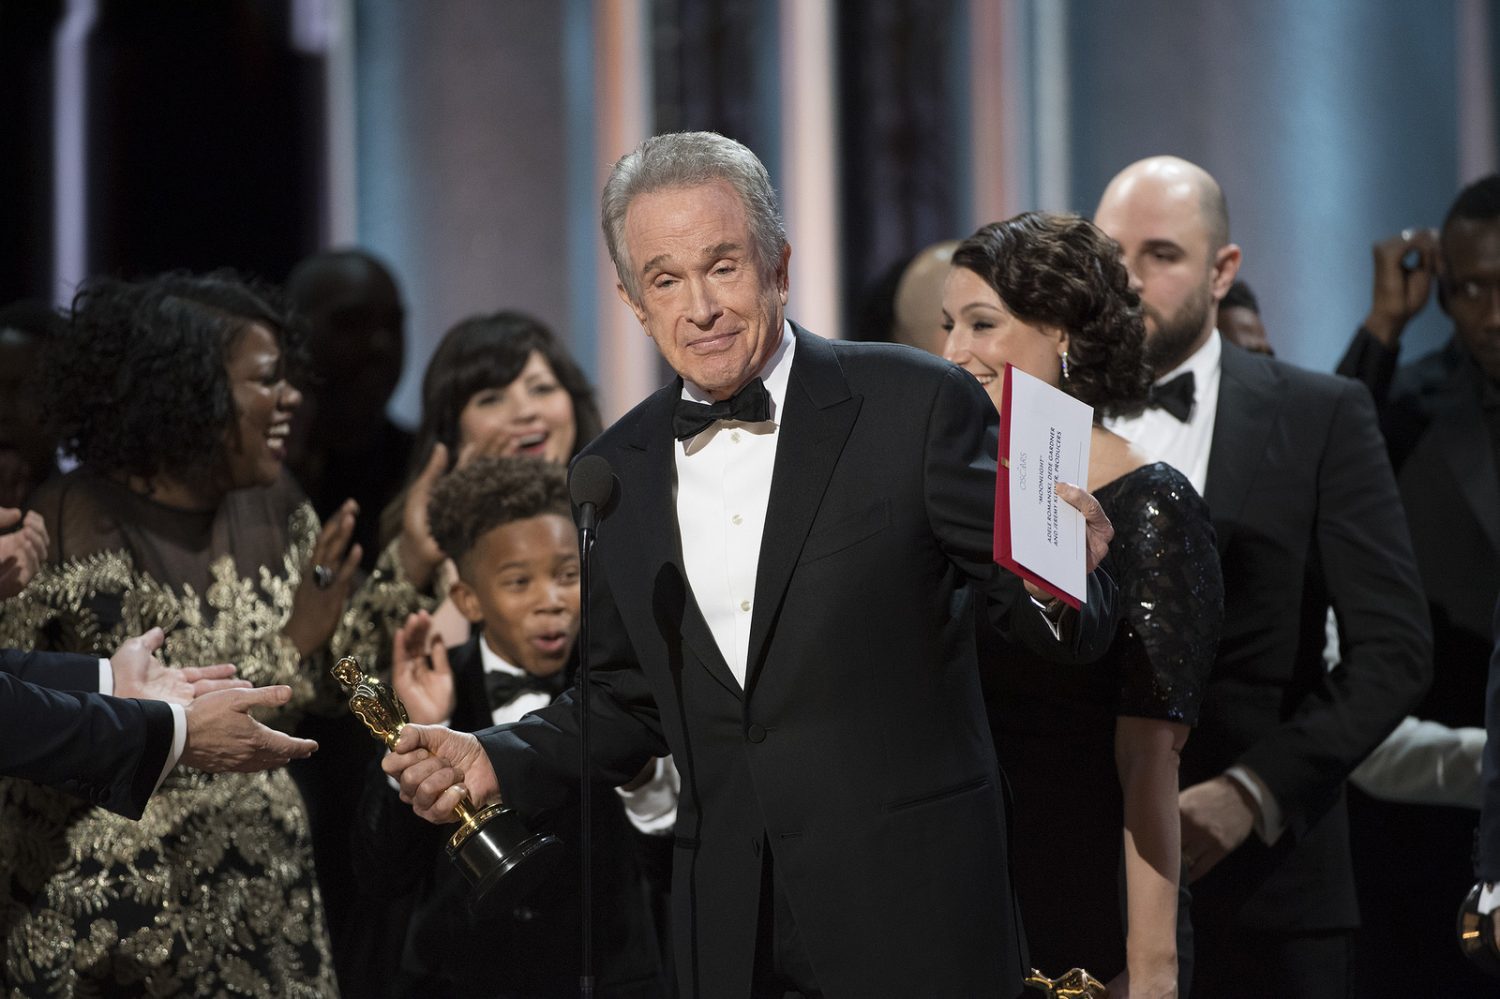 Actor Warren Beatty at the Academy Awards, where he was given the wrong envelope. Photo courtesy Disney/ABC Television Group. 